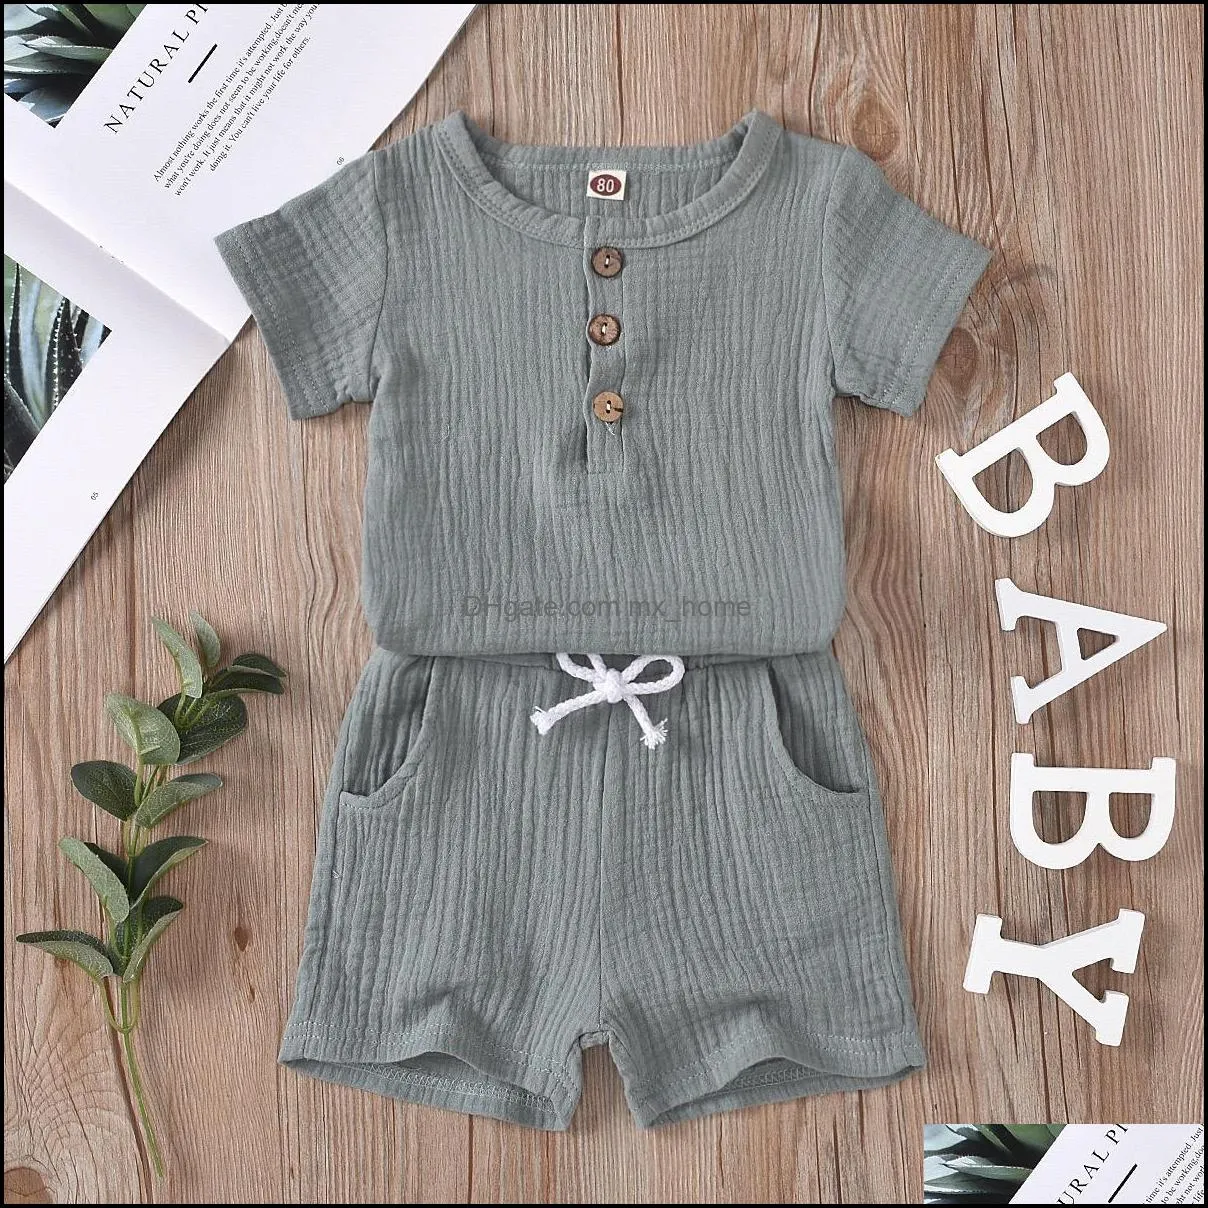 fashions baby kids girls boys children clothing sets organic linen cotton suits front buttons tops straps shorts 2pieces summer